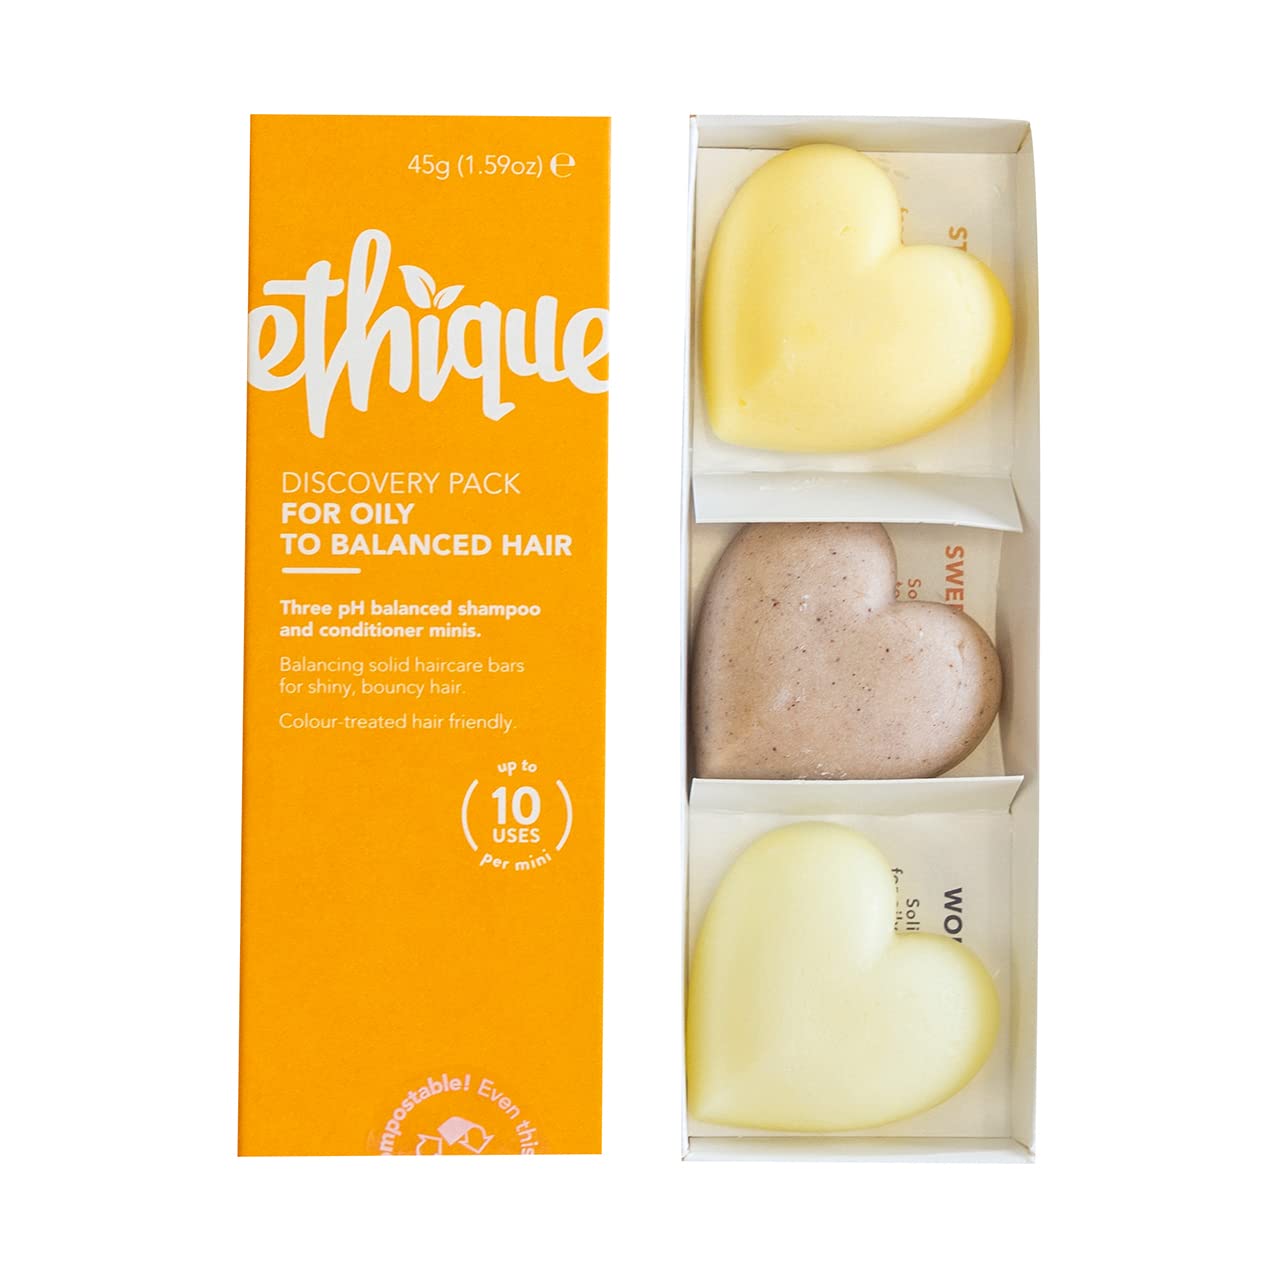 Ethique Discovery Pack for Oily Hair - Shampoo & Conditioner - Plastic-Free, Vegan, Cruelty-Free, Eco-Friendly, 3 Travel Bars, 1.59 oz (Pack of 1)